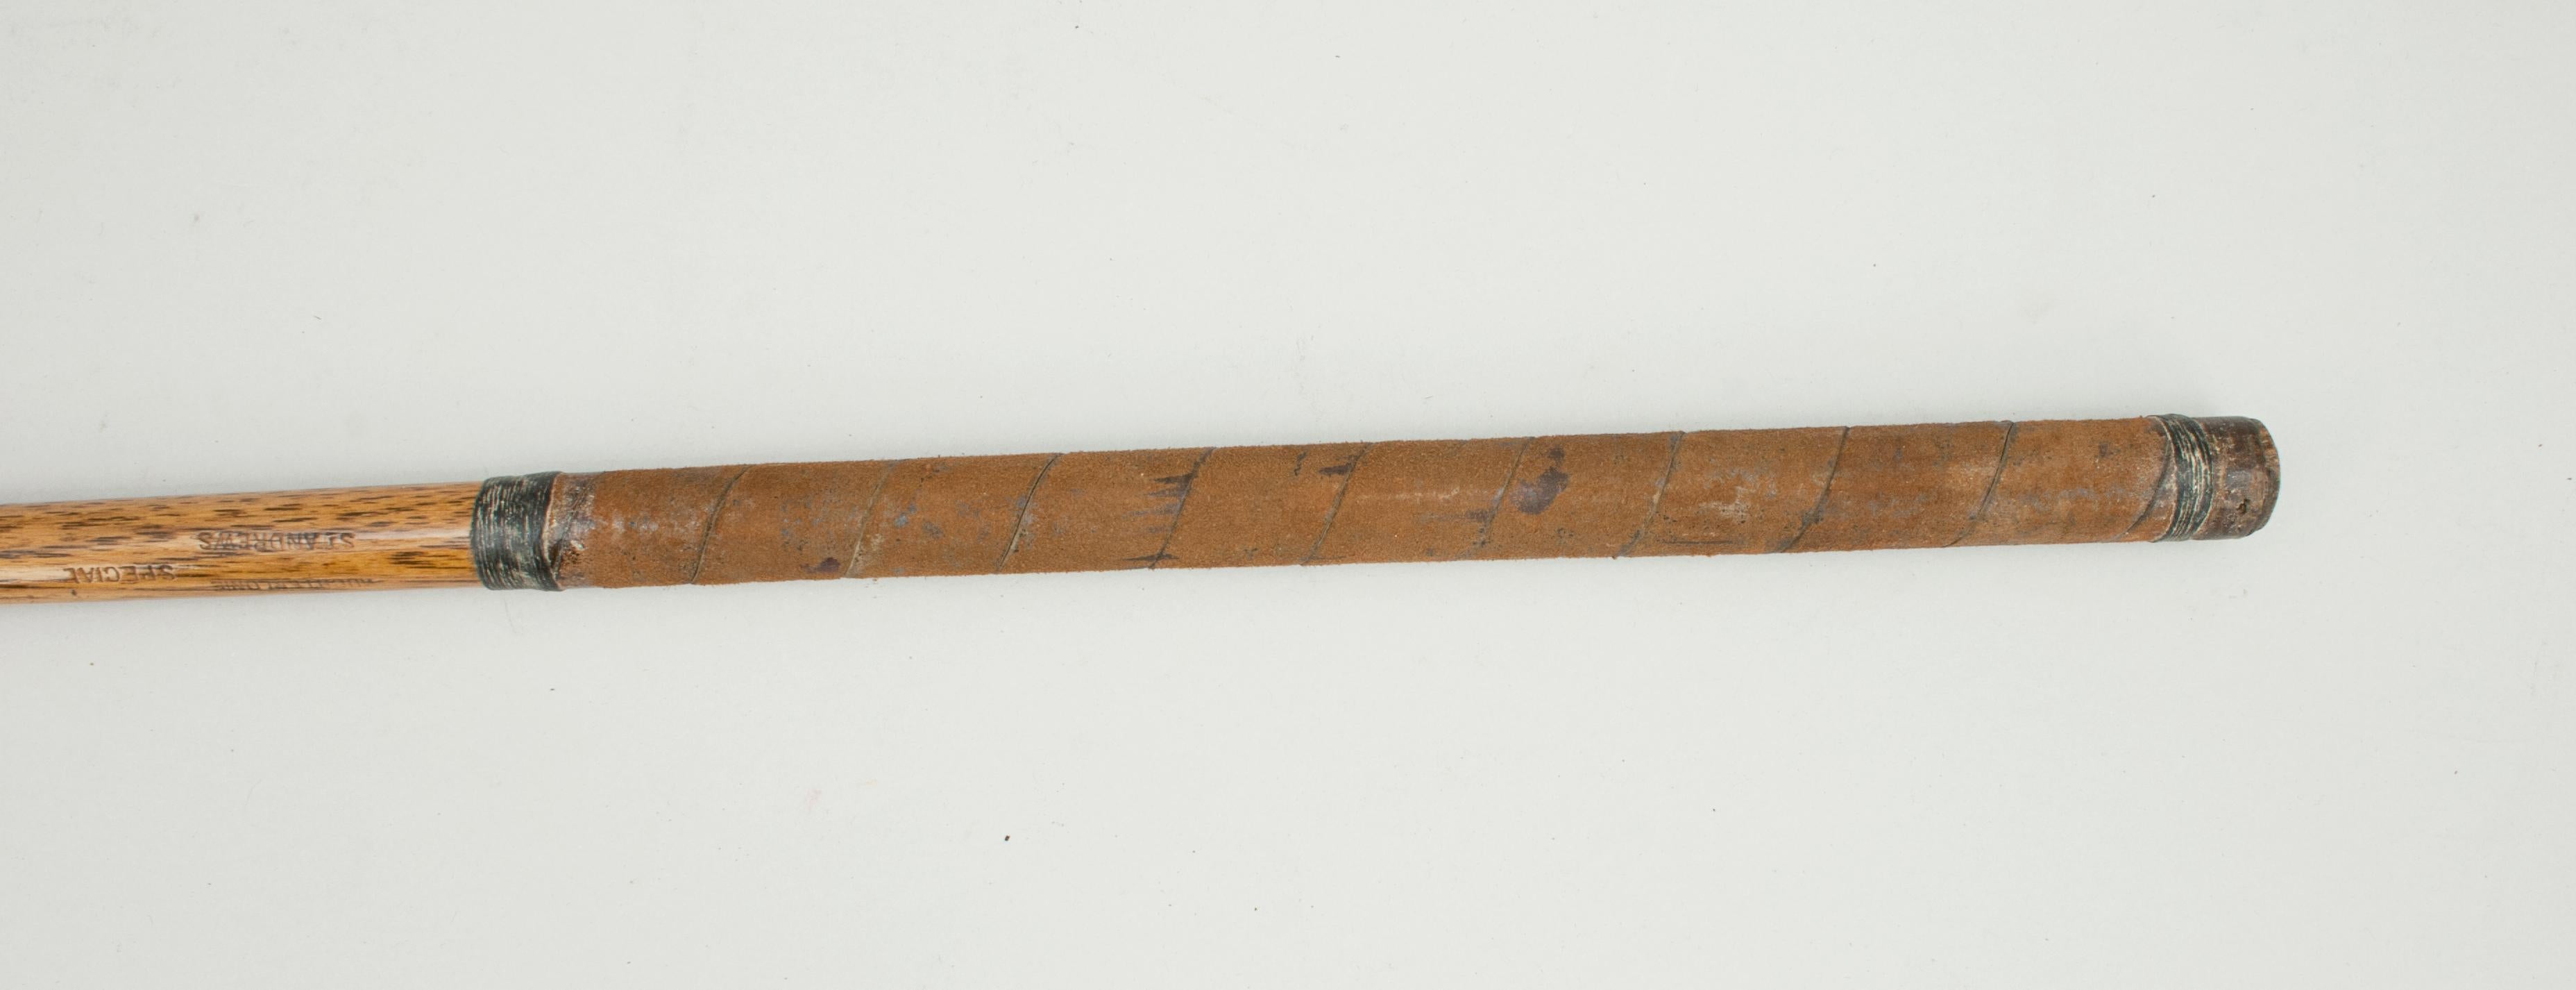 Vintage Golf Club, Hickory Shafted by Auchterlonie, St Andrews 3